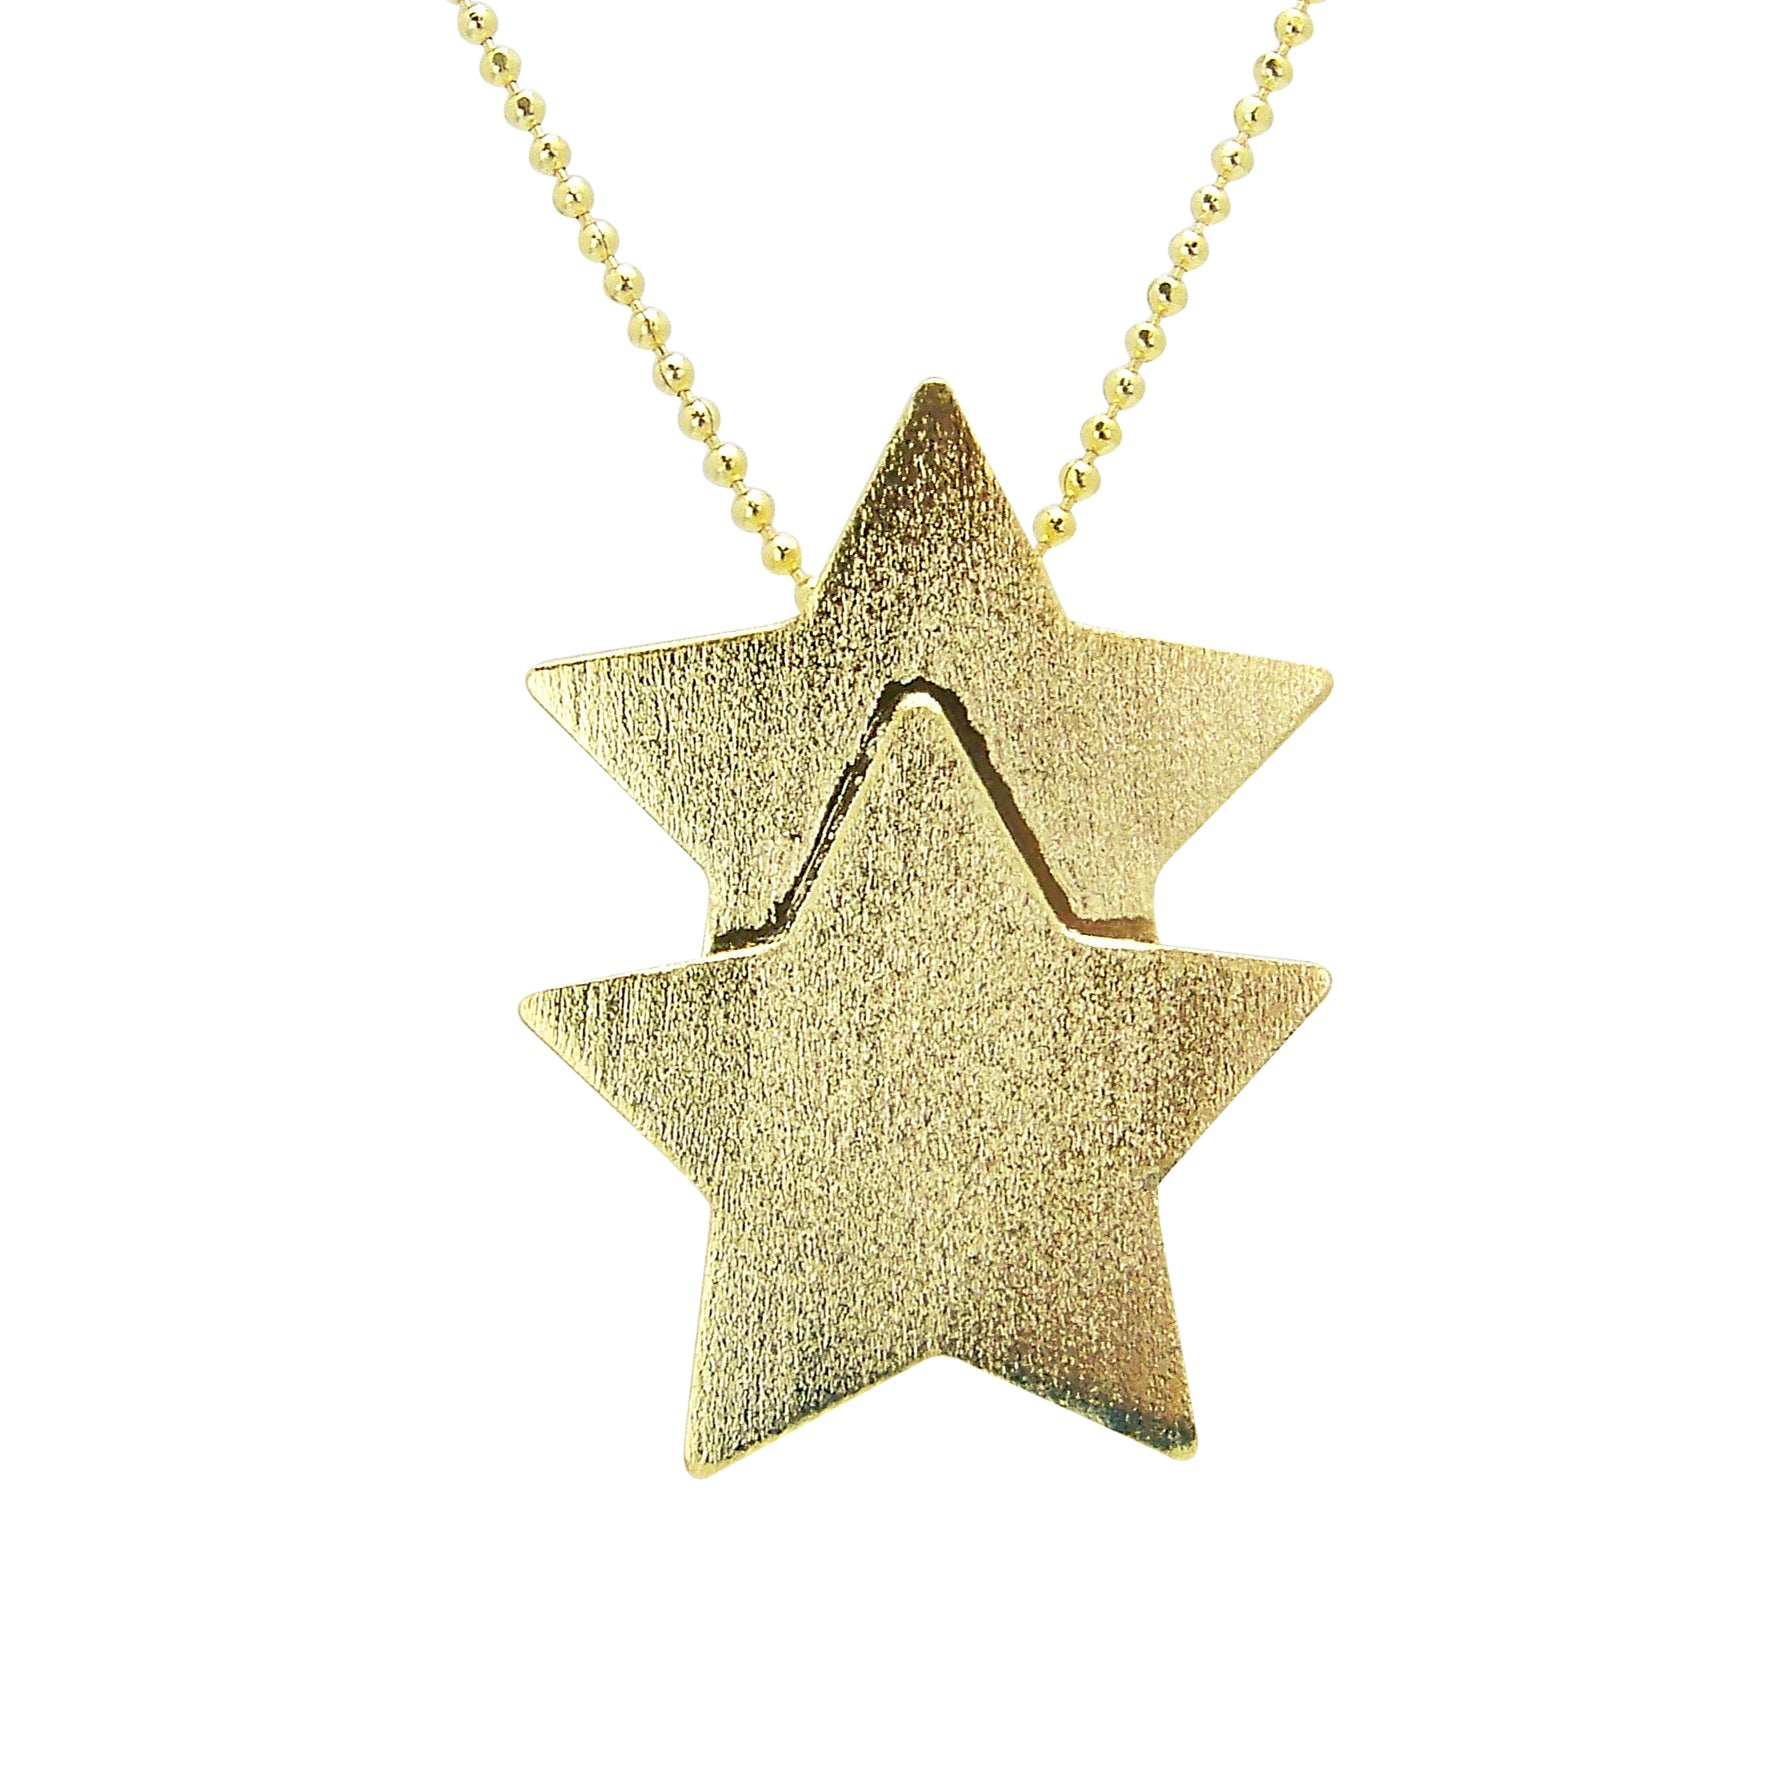 Pendant image of Sheila Fajl Castor Double Star Pendant Necklace in Gold Plated